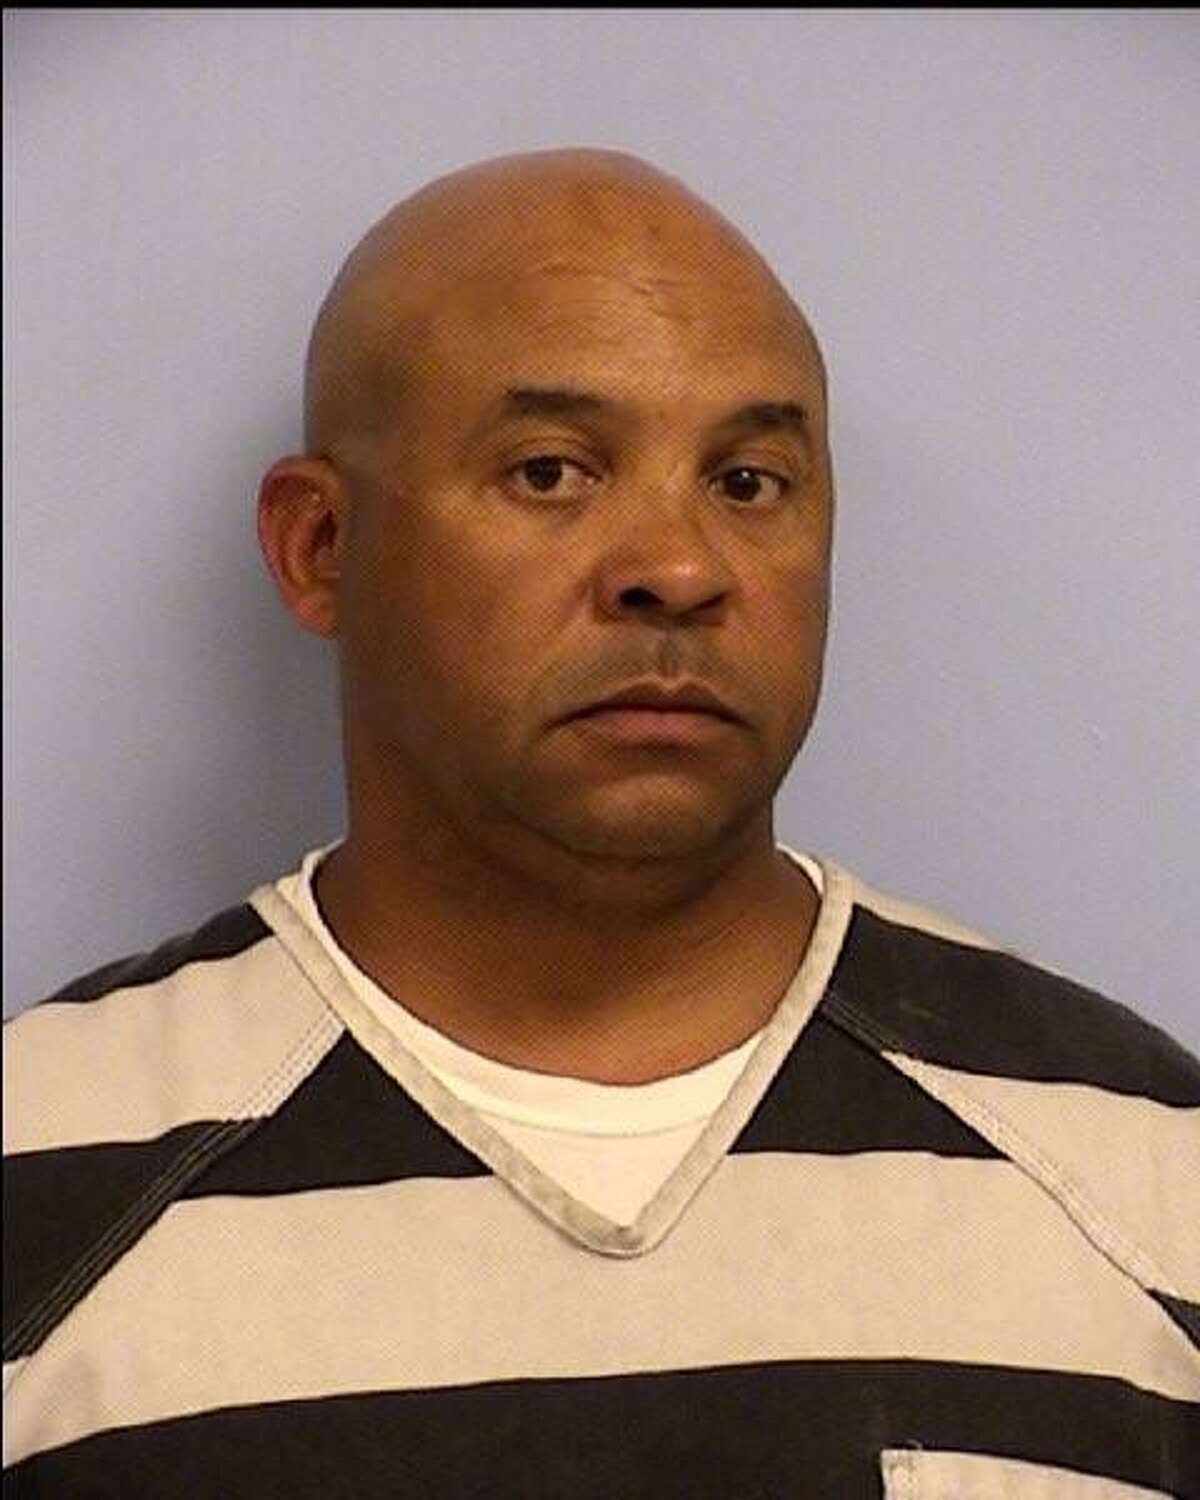 John M. Jones, leader of the Counterterrorism Division of the Texas Department of Public Safety, was arrested on Tuesday night, July 30, 2019, on a sexual assault charge.